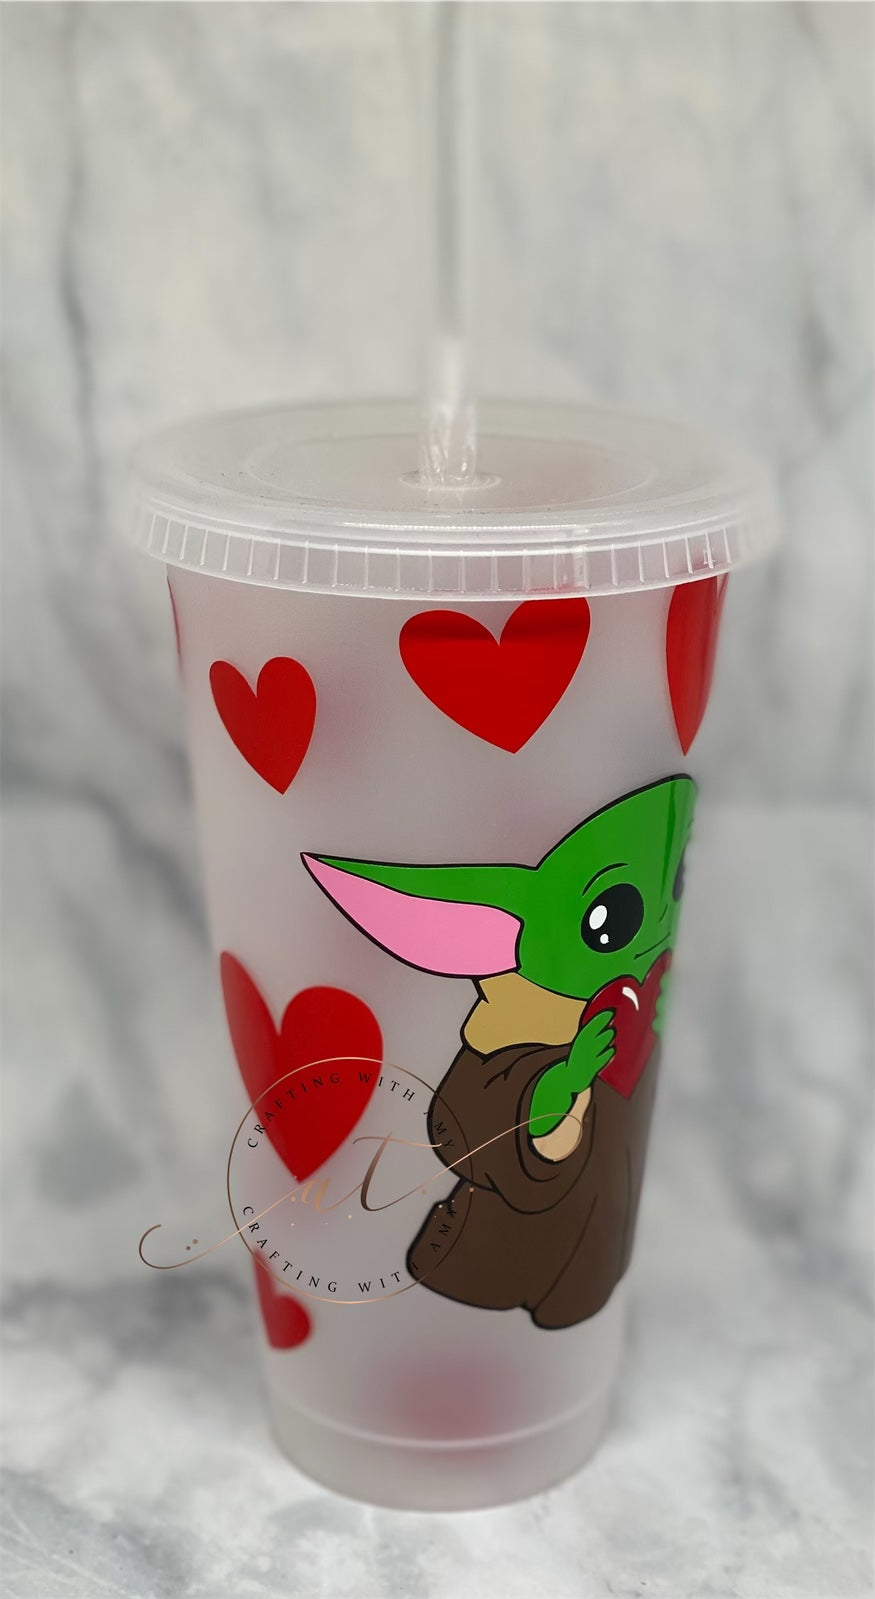 Baby Yoda Heart Valentine’s cold cup, col cup, Valentine’s Day, yoda,baby yoga freeshipping - CraftingwithAmy